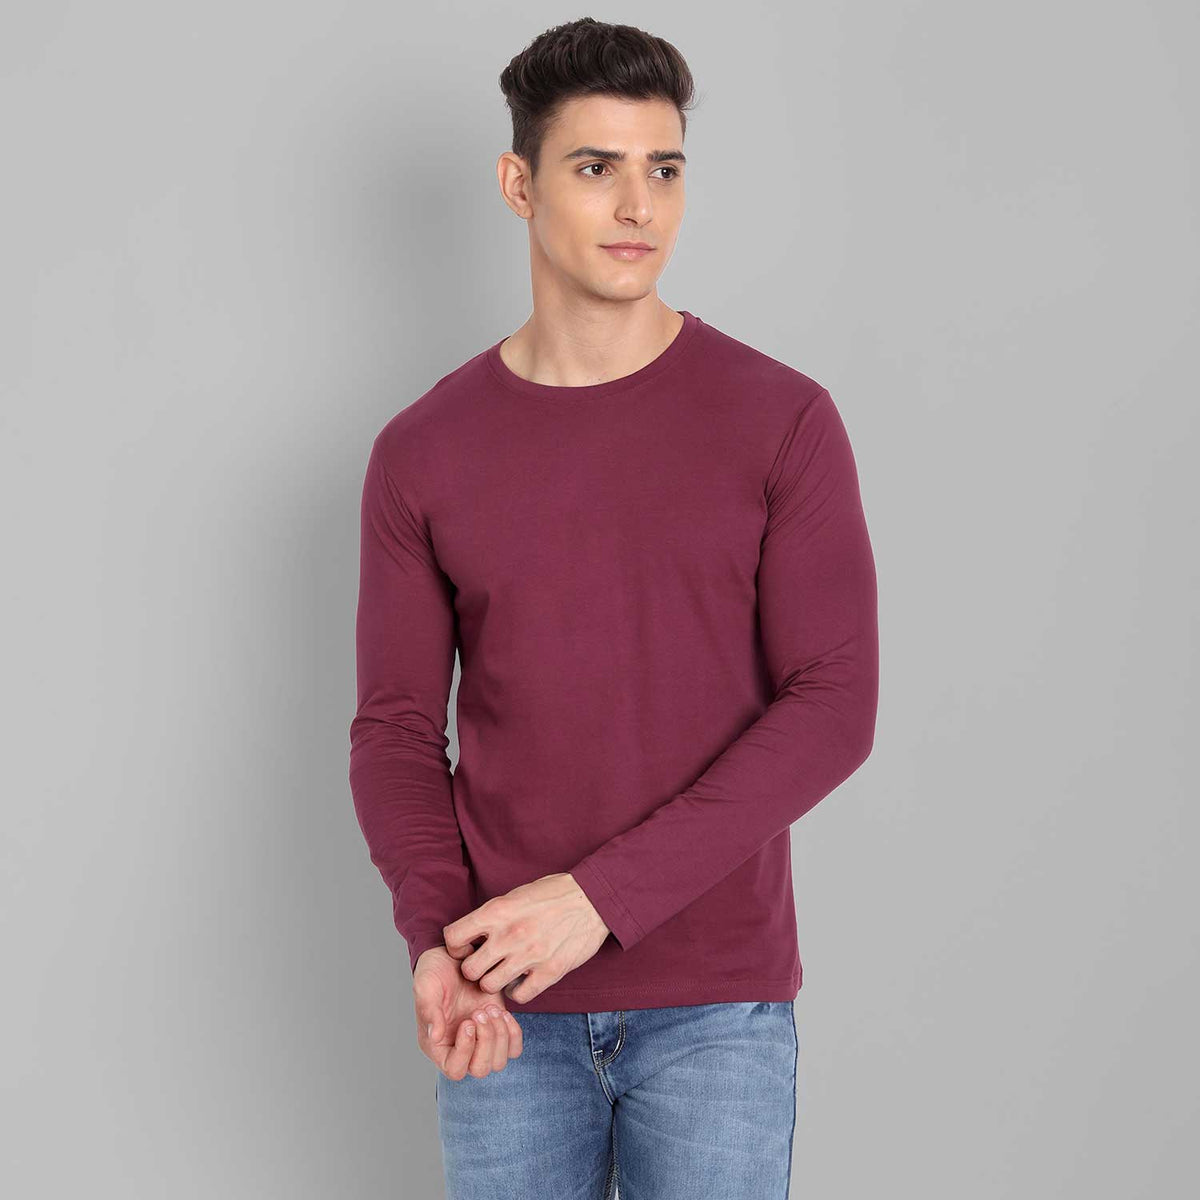 Full Sleeve Maroon And Half Sleeve Red T-shirt Combo For Men